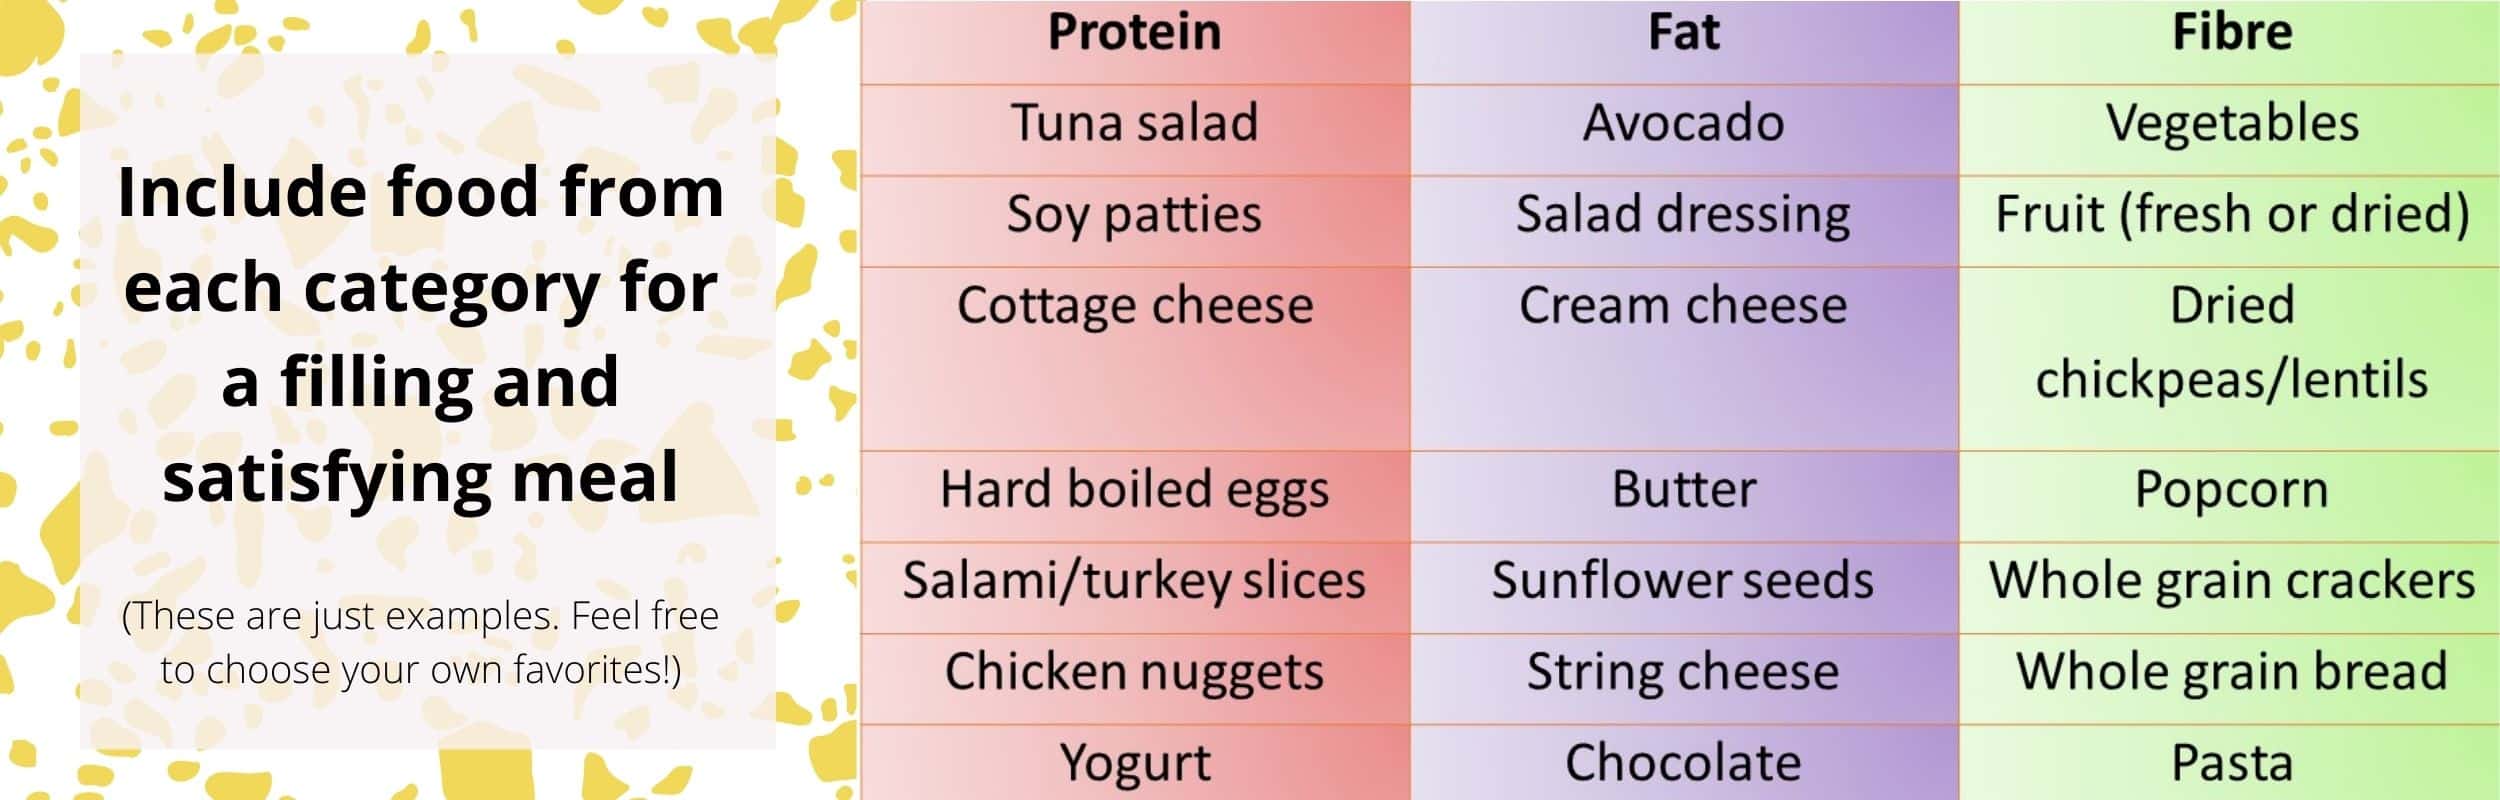 Include food from each category for a filling and satisfying meal. These are examples only. Choose your own favorites!
Protein: tuna salad, soy patties, cottage cheese, eggs, salami/turkey slices, chicken nuggets, yogurt
Fat: avocado, salad dressing, cream cheese, butter, sunflower seeds, string cheese, chocolate
Fibre: vegetables, fruit, chickpeas/lentils, popcorn, whole grain crackers, whole grain bread, pasta